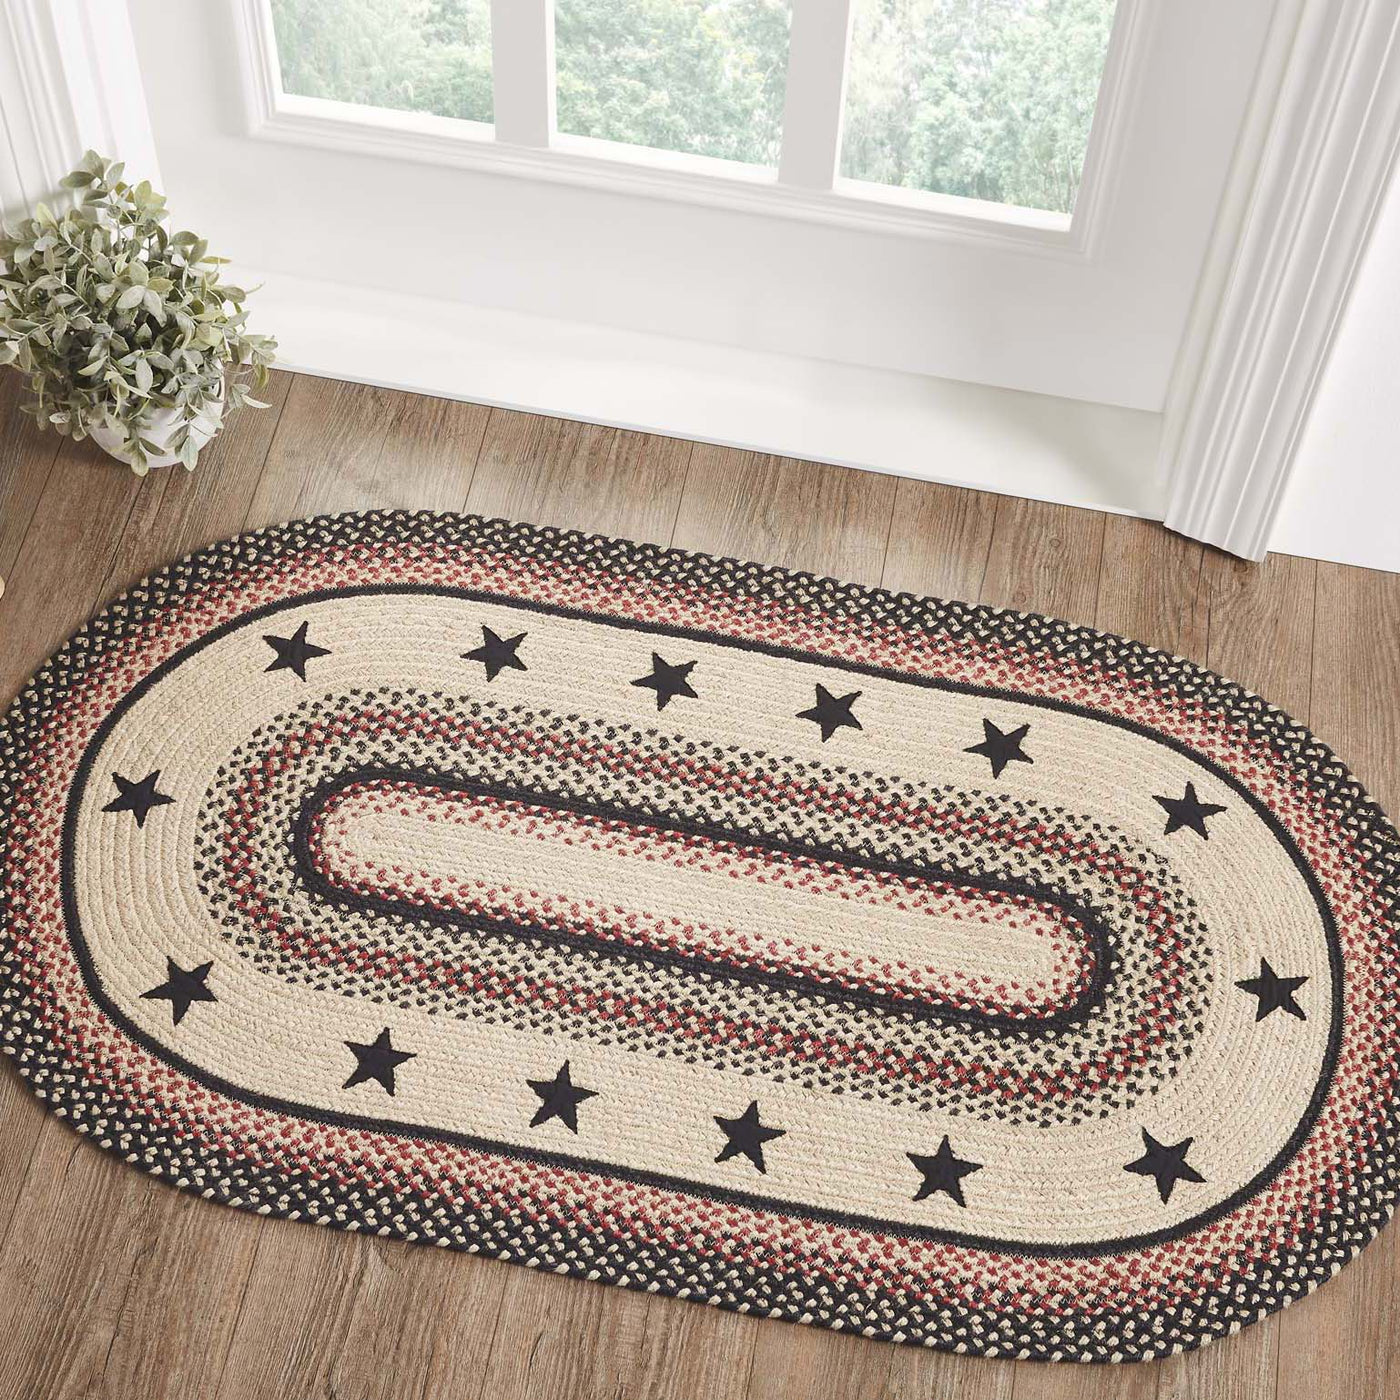 Colonial Star Rugs